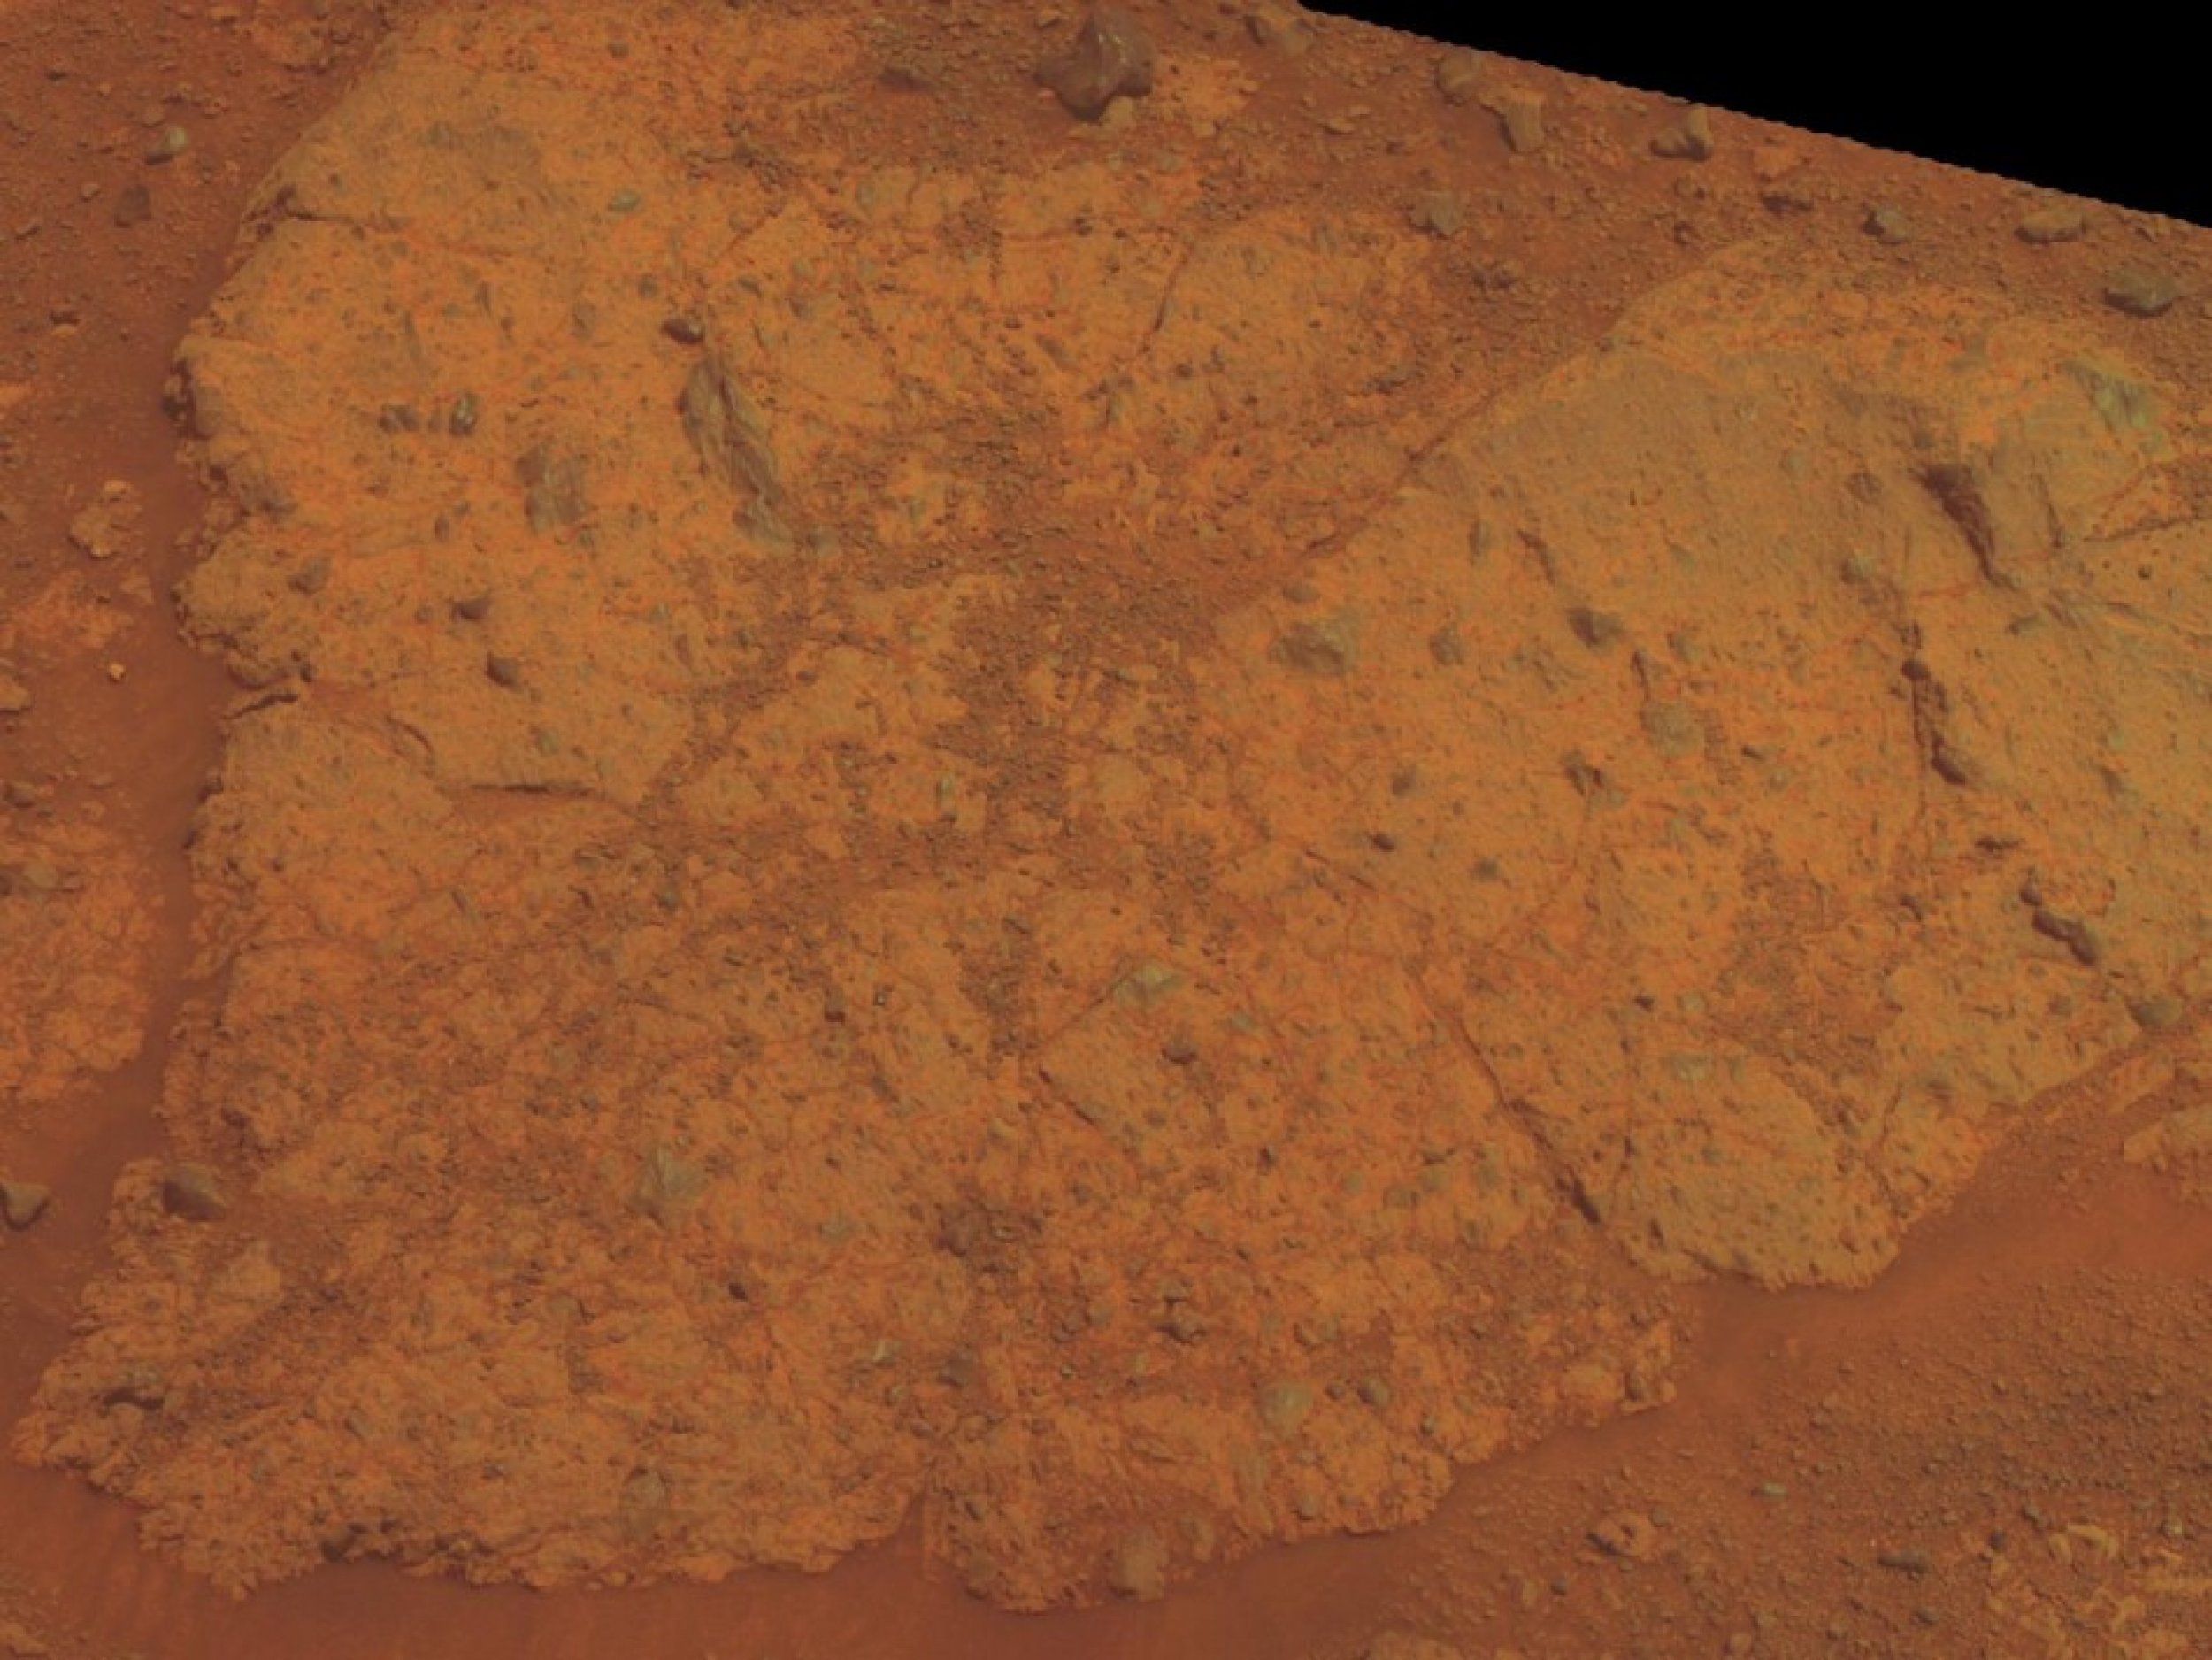 NASAs Rover Examines Second Rock at Mars Endeavour Crater